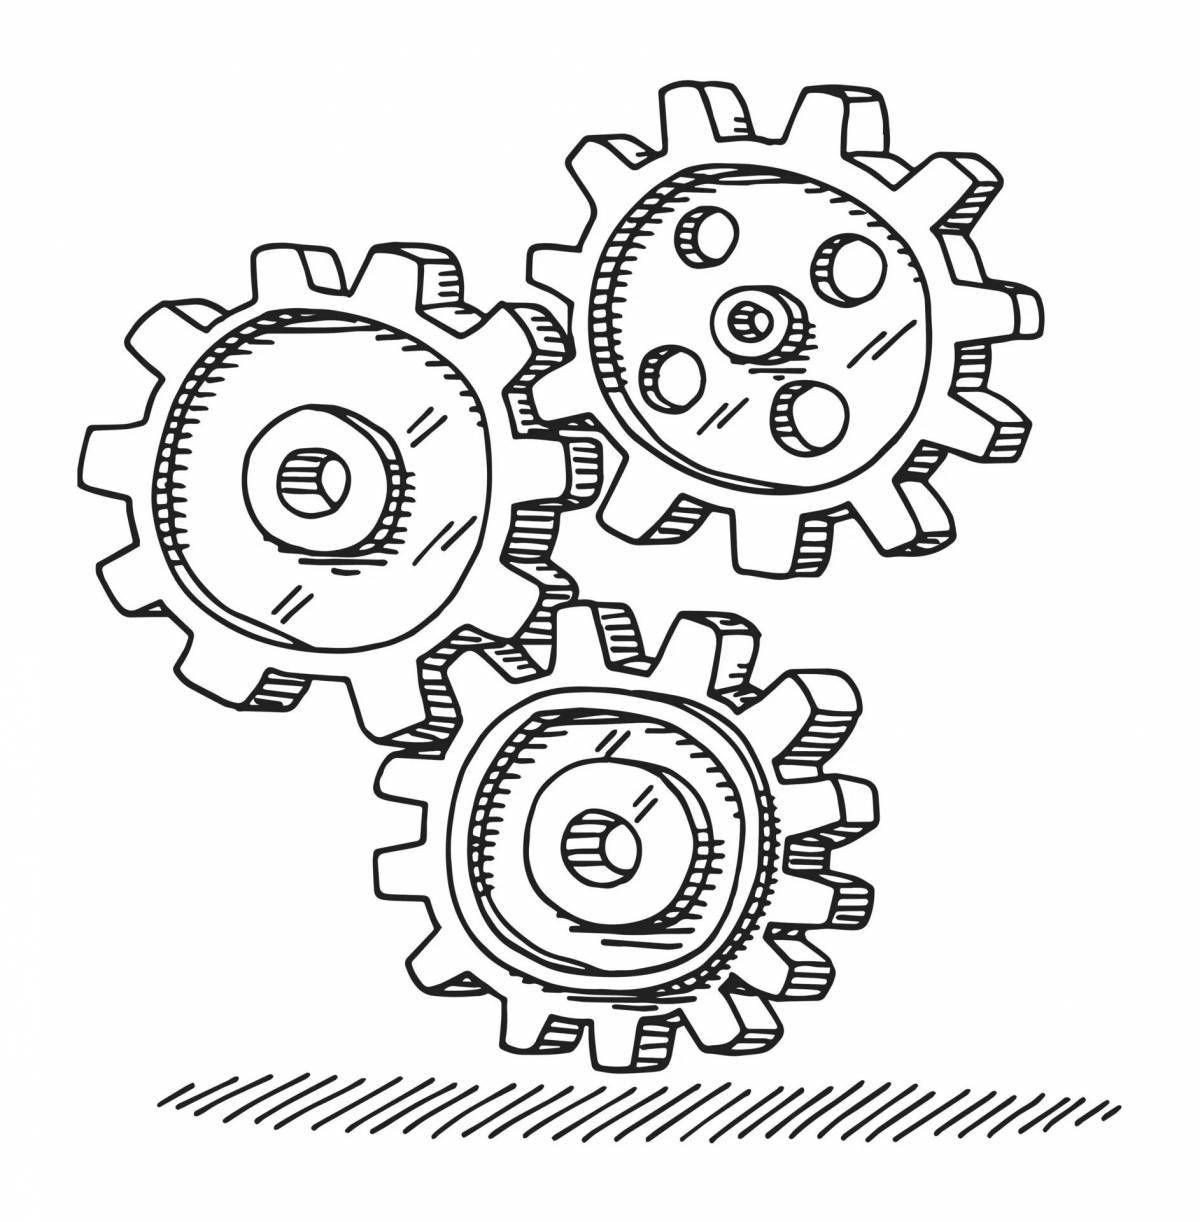 Coloring gears for kids